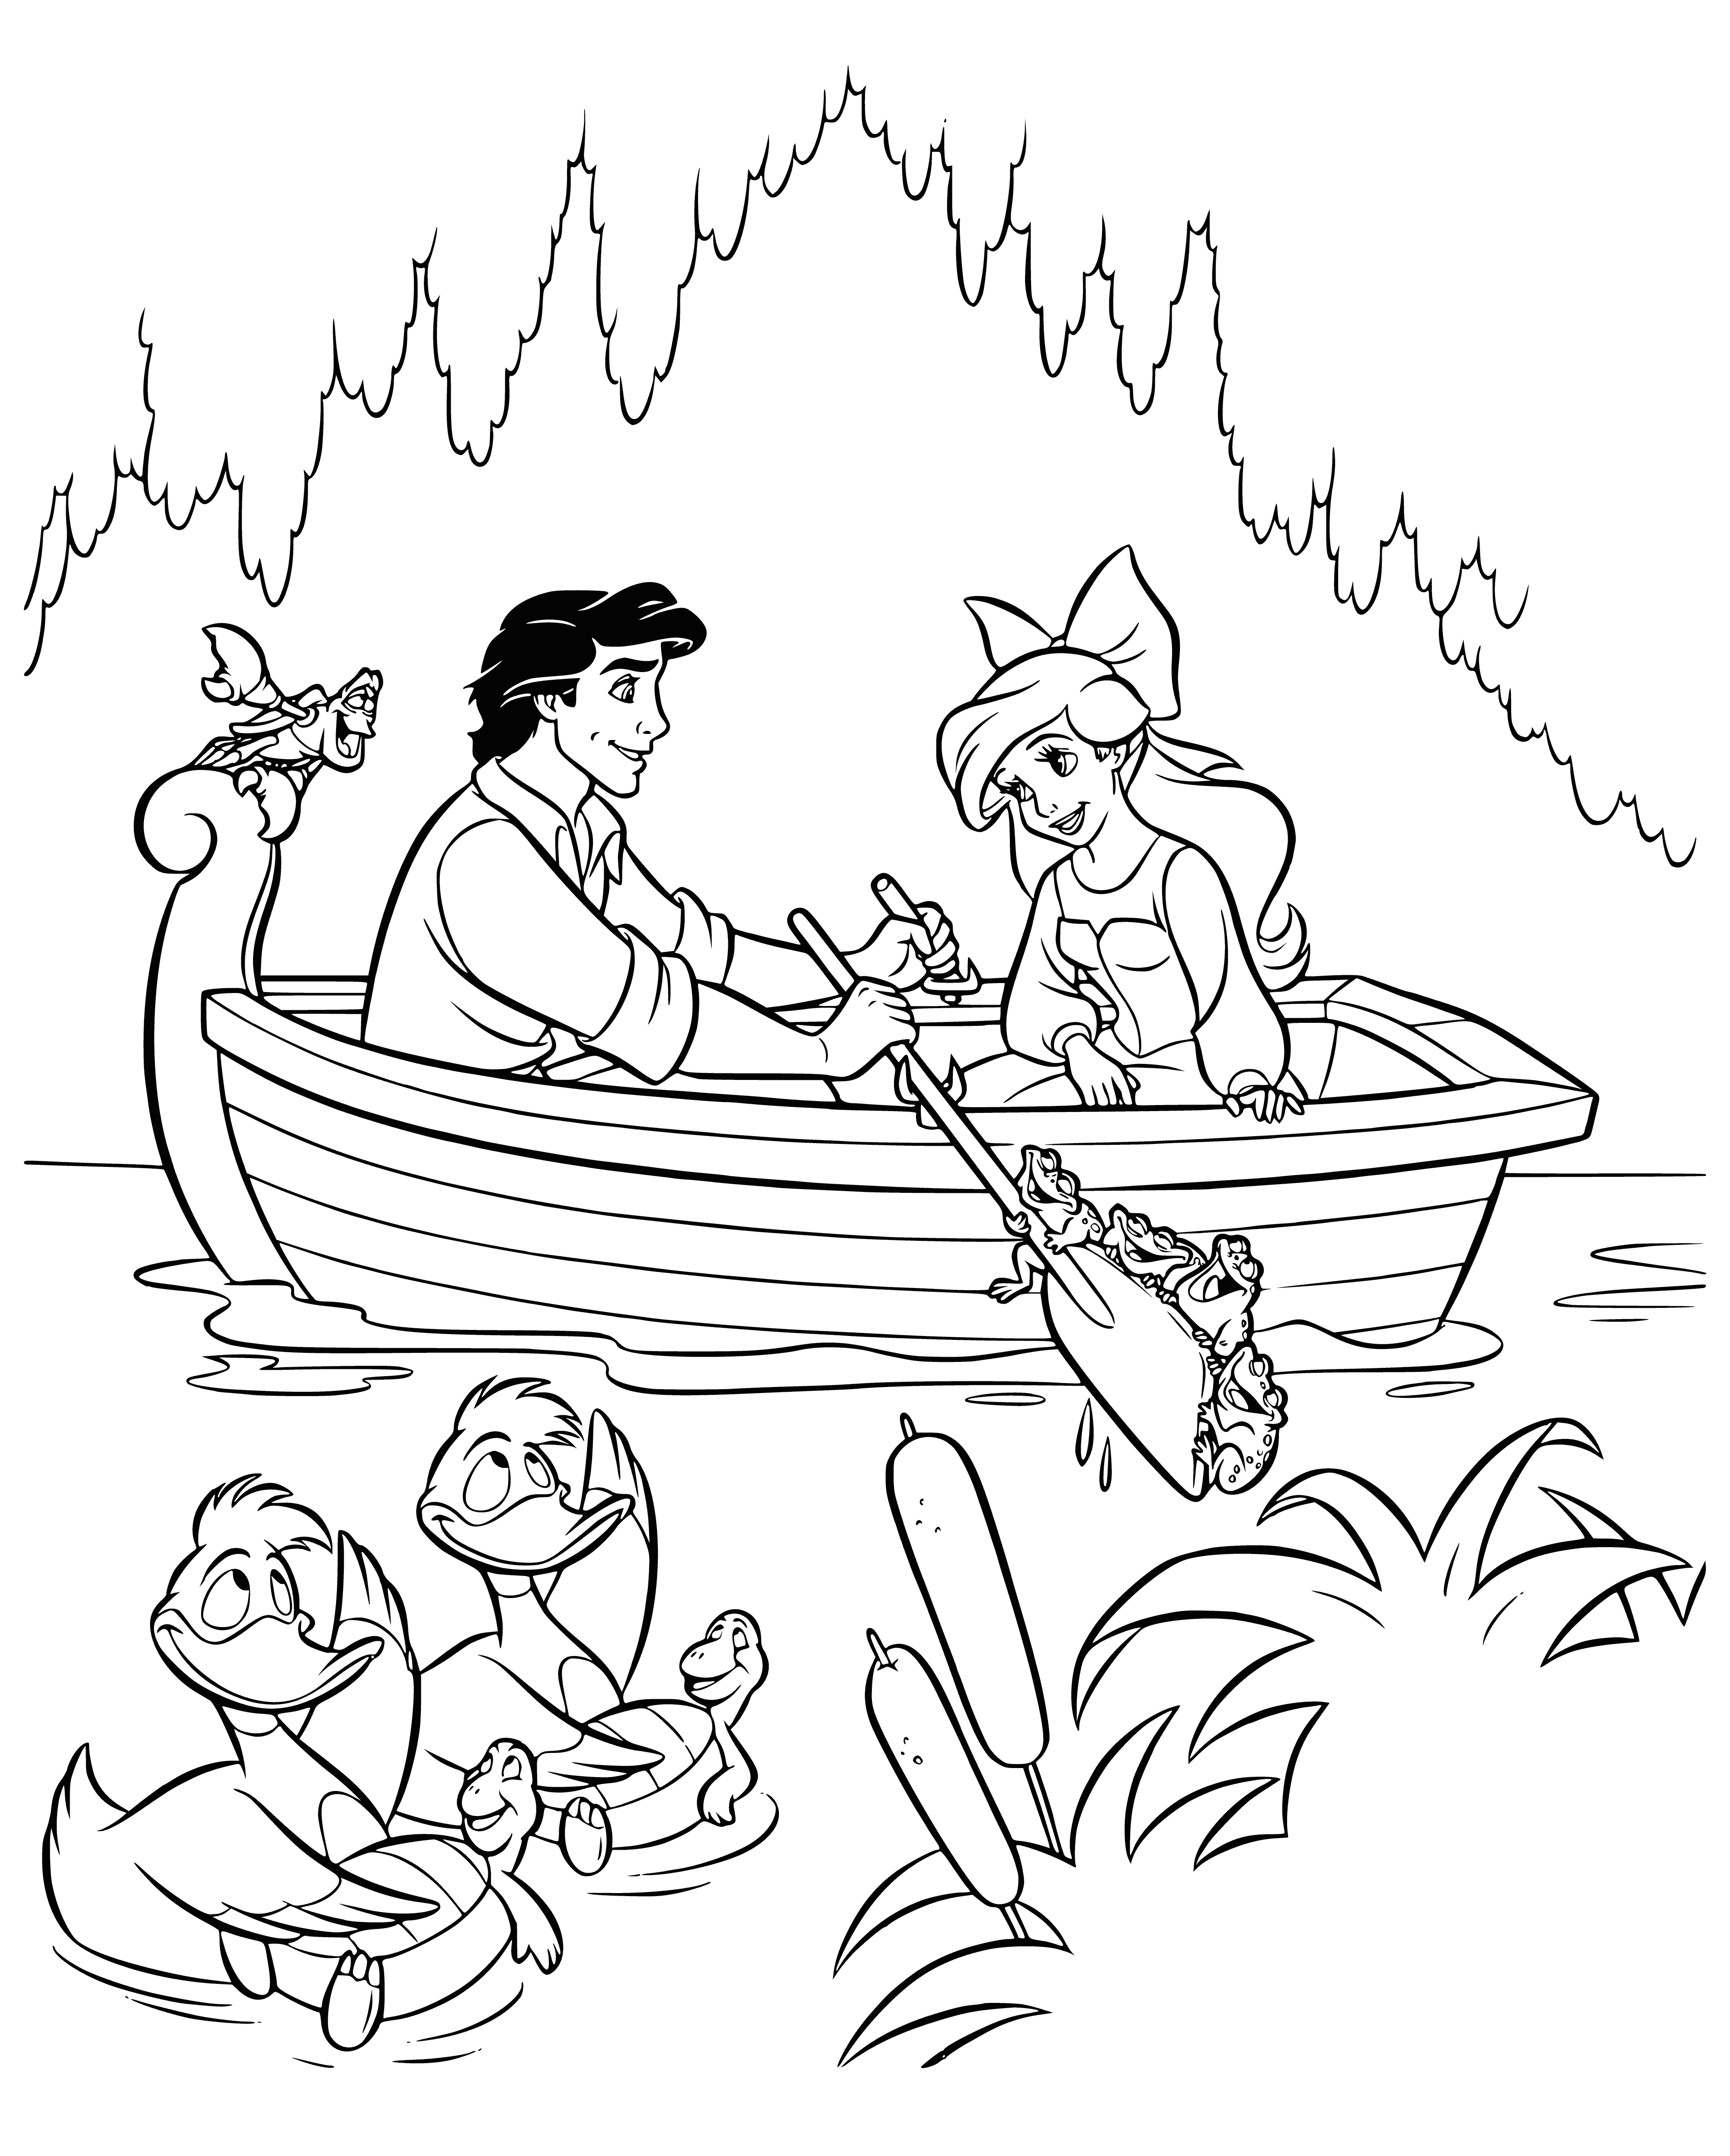 coloring page: The little mermaid and prince embrace, smiling happily as they sail away.